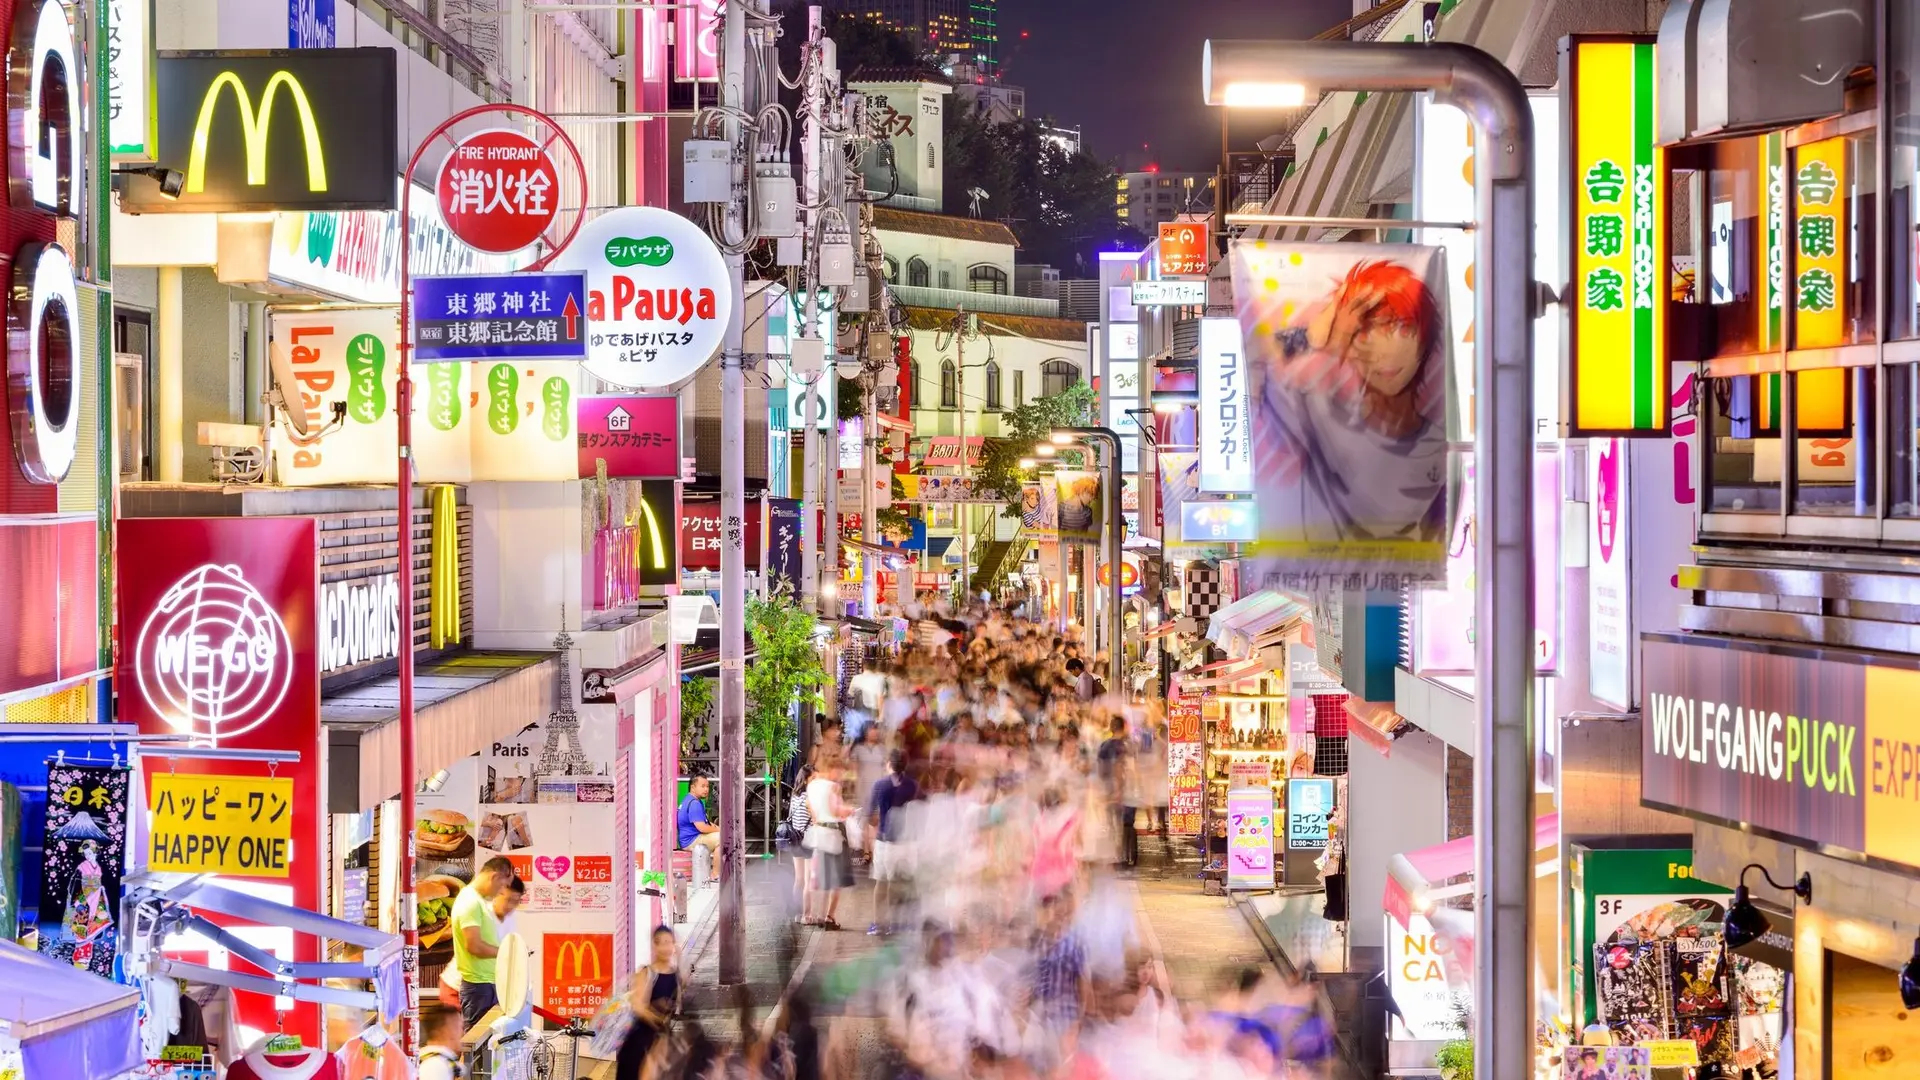 Harajuku with advertisements, crowded population and bright lights.